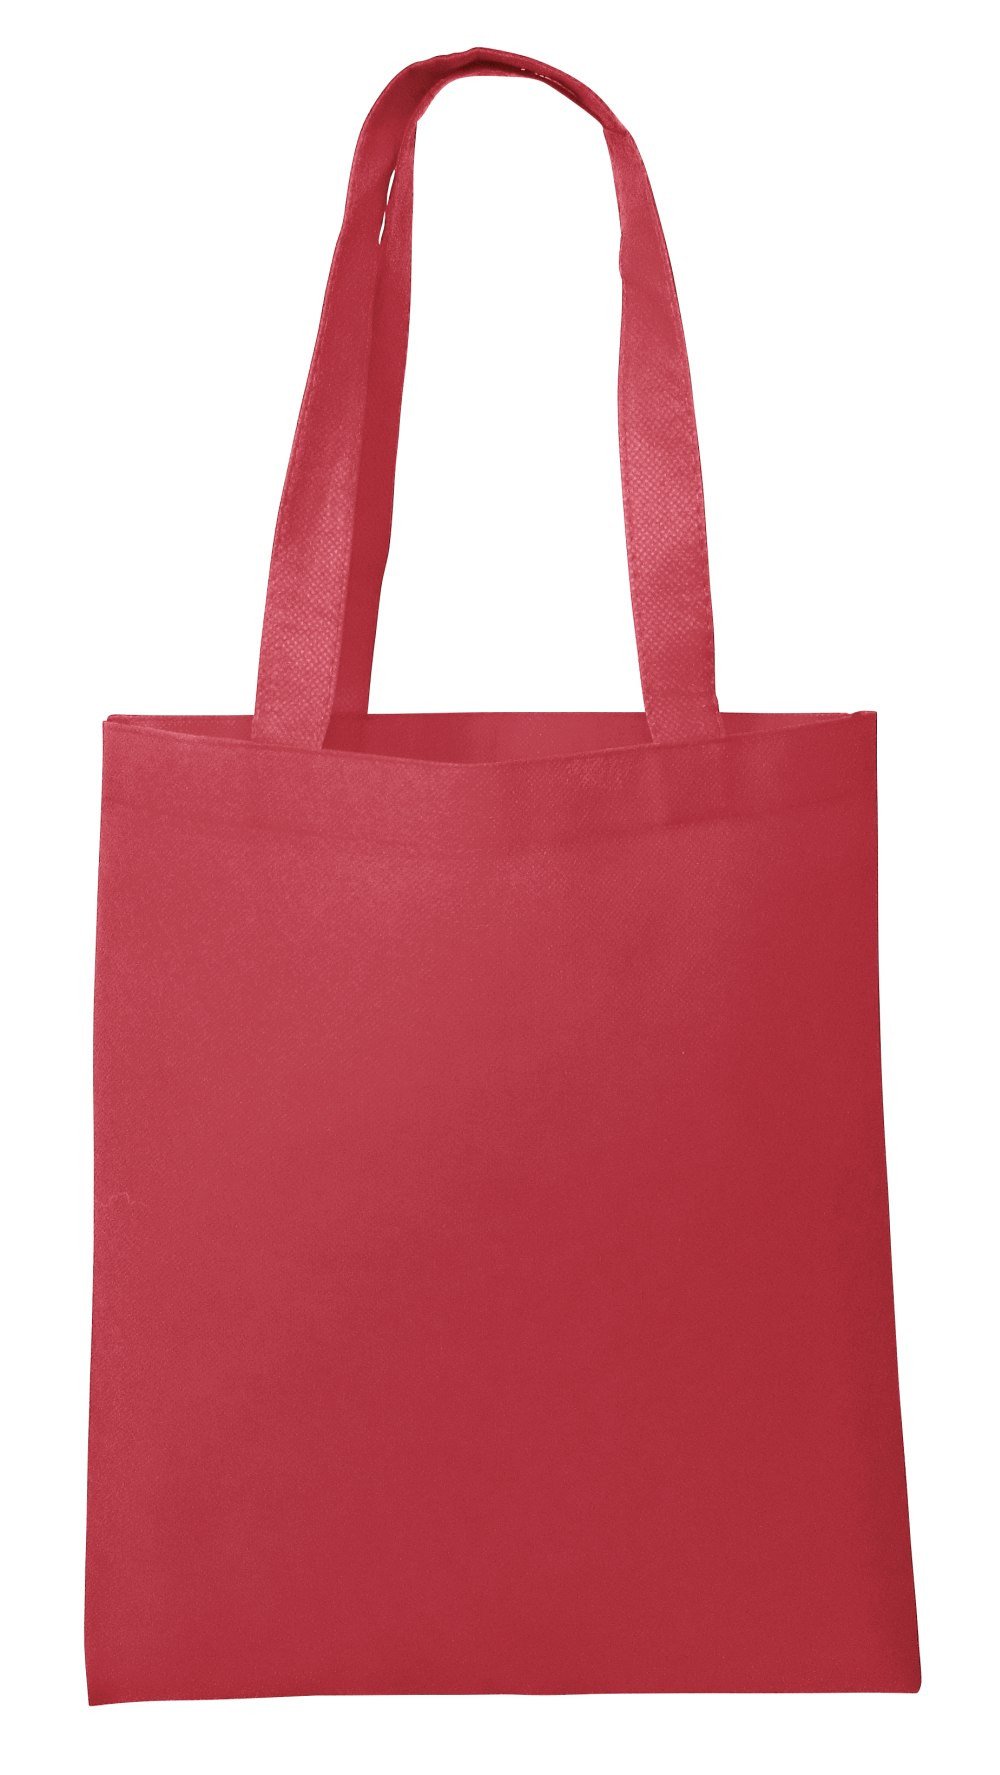 Cheap Promotional Tote Bags red